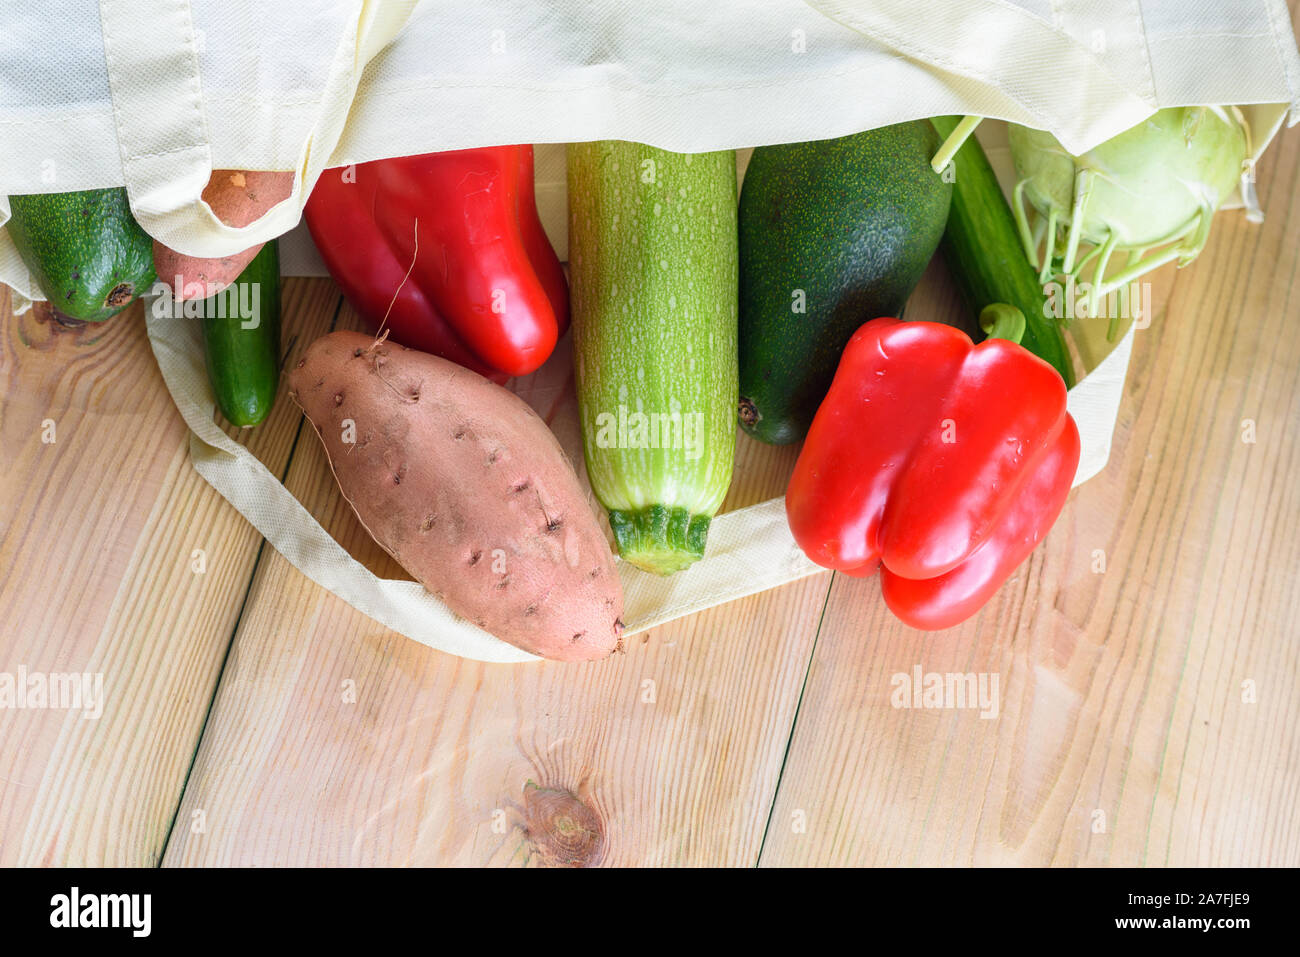 World free of plastic.Reusable eco friendly canvas grocery shopping bag with vegetables-sweet potato, zucchini, pepper, tomatoes, cucumber and avocado on wooden desk. Organic products. Less plastic. Stock Photo